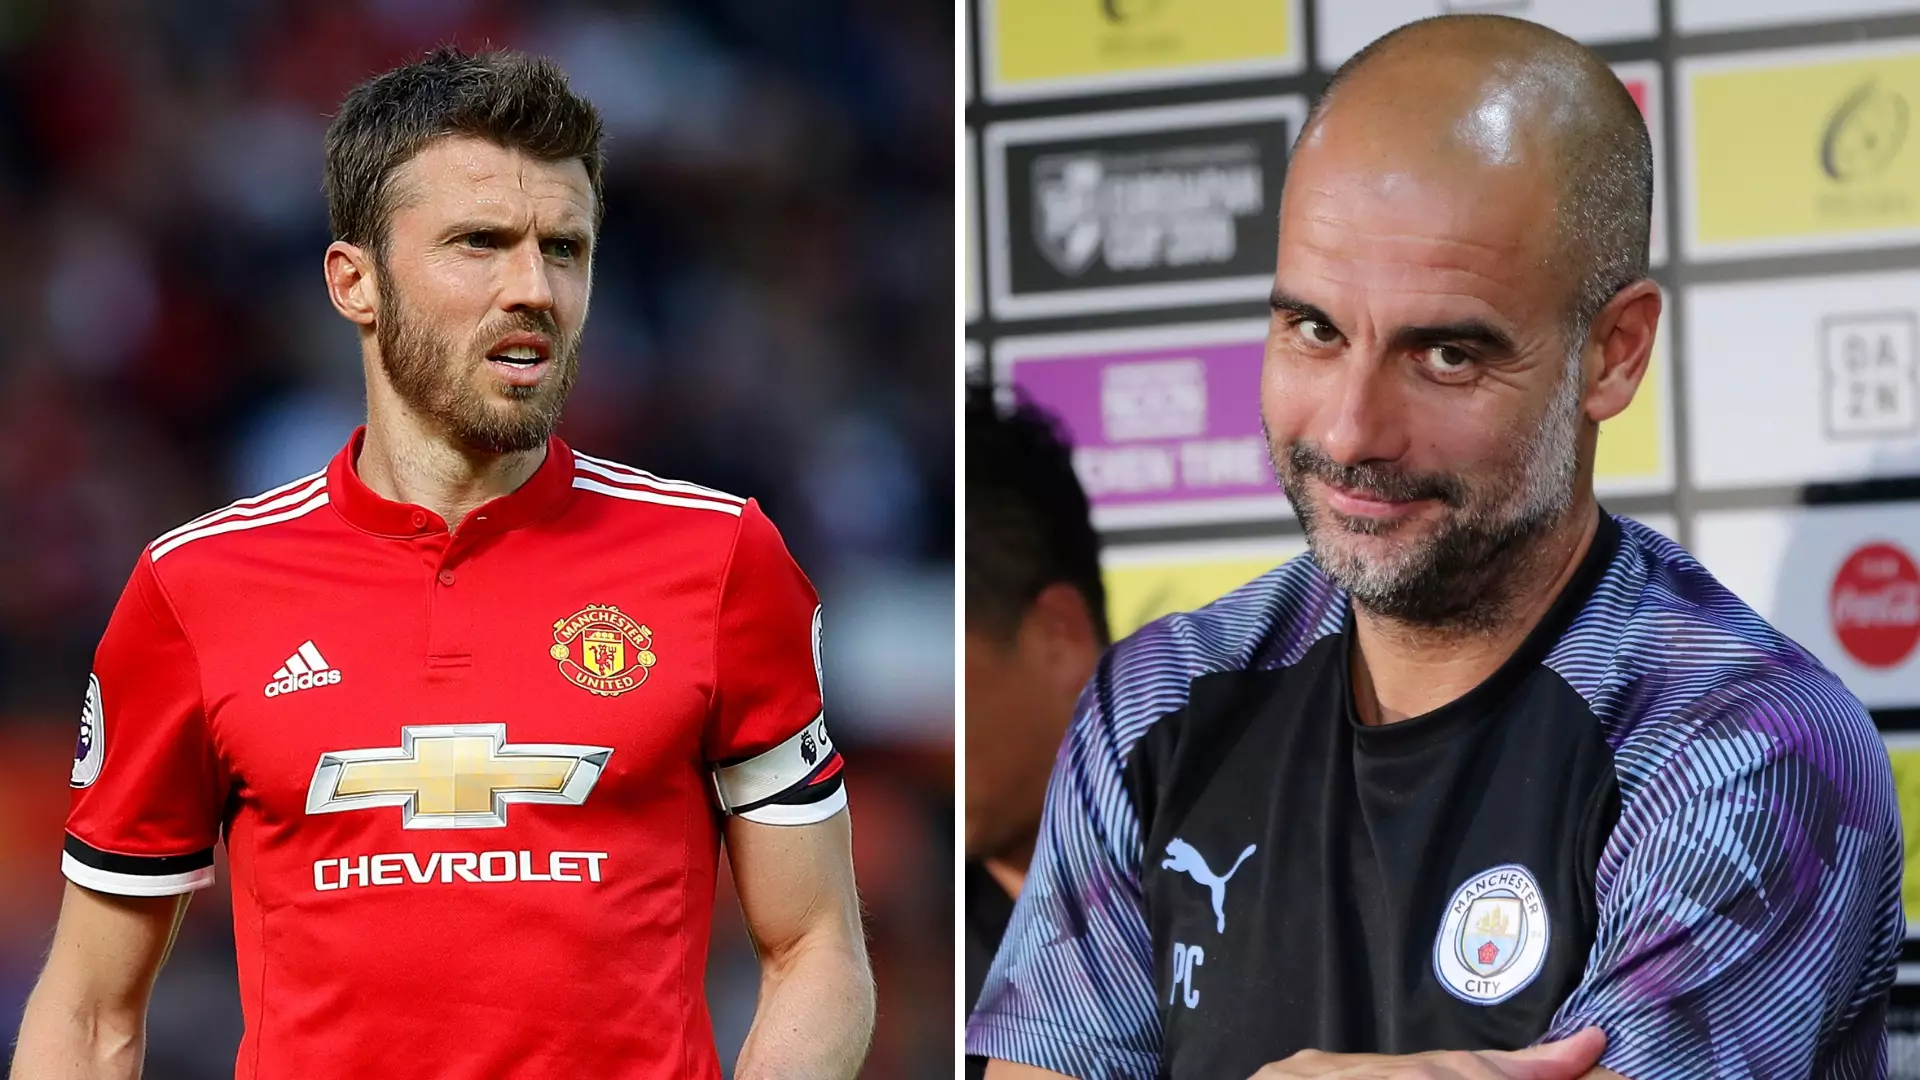 Pep Guardiola Says Michael Carrick Is 'One Of The Best Holding Midfielders I've Ever Seen'